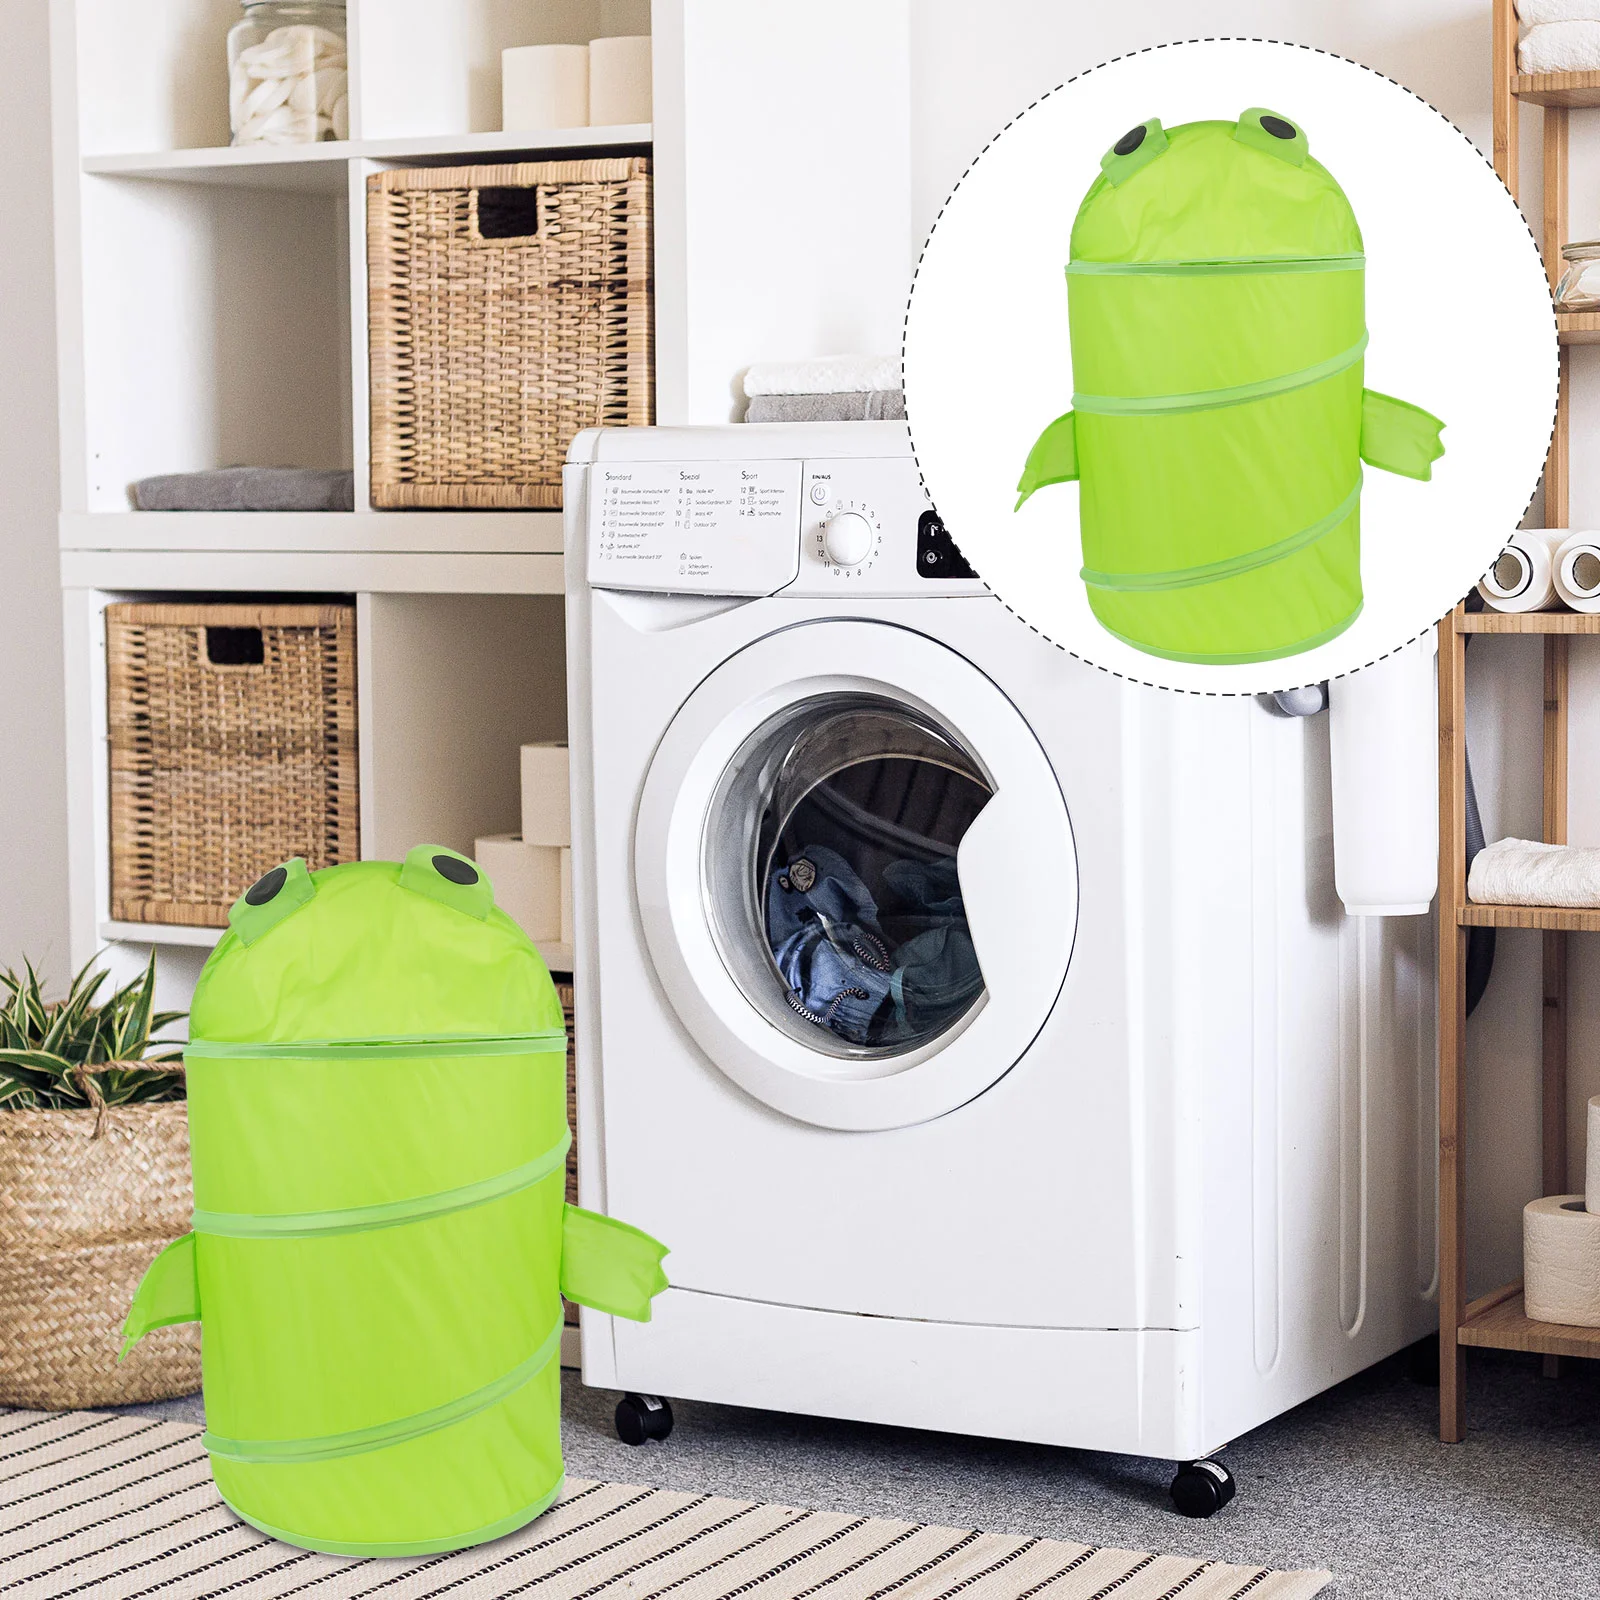 

Basket Laundry Hamper Storage Sundries Organizer Clothes Baskets Toy Foldable Collapsible Mesh Dirty Up Cloth Bucket Kid Bin